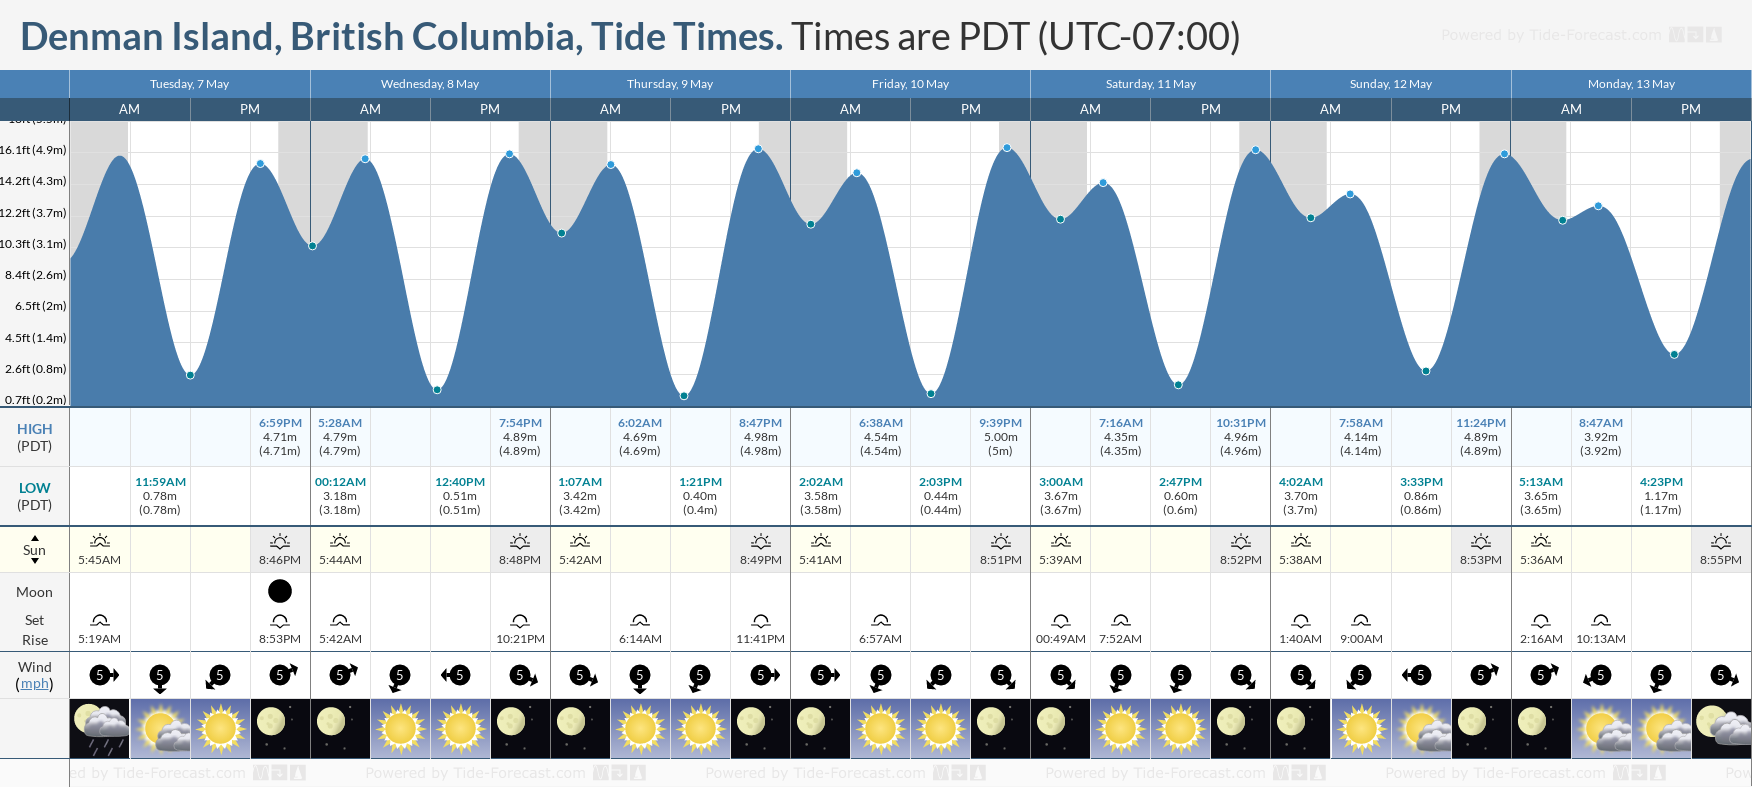 Denman Island, British Columbia Tide Chart including high and low tide tide times for the next 7 days